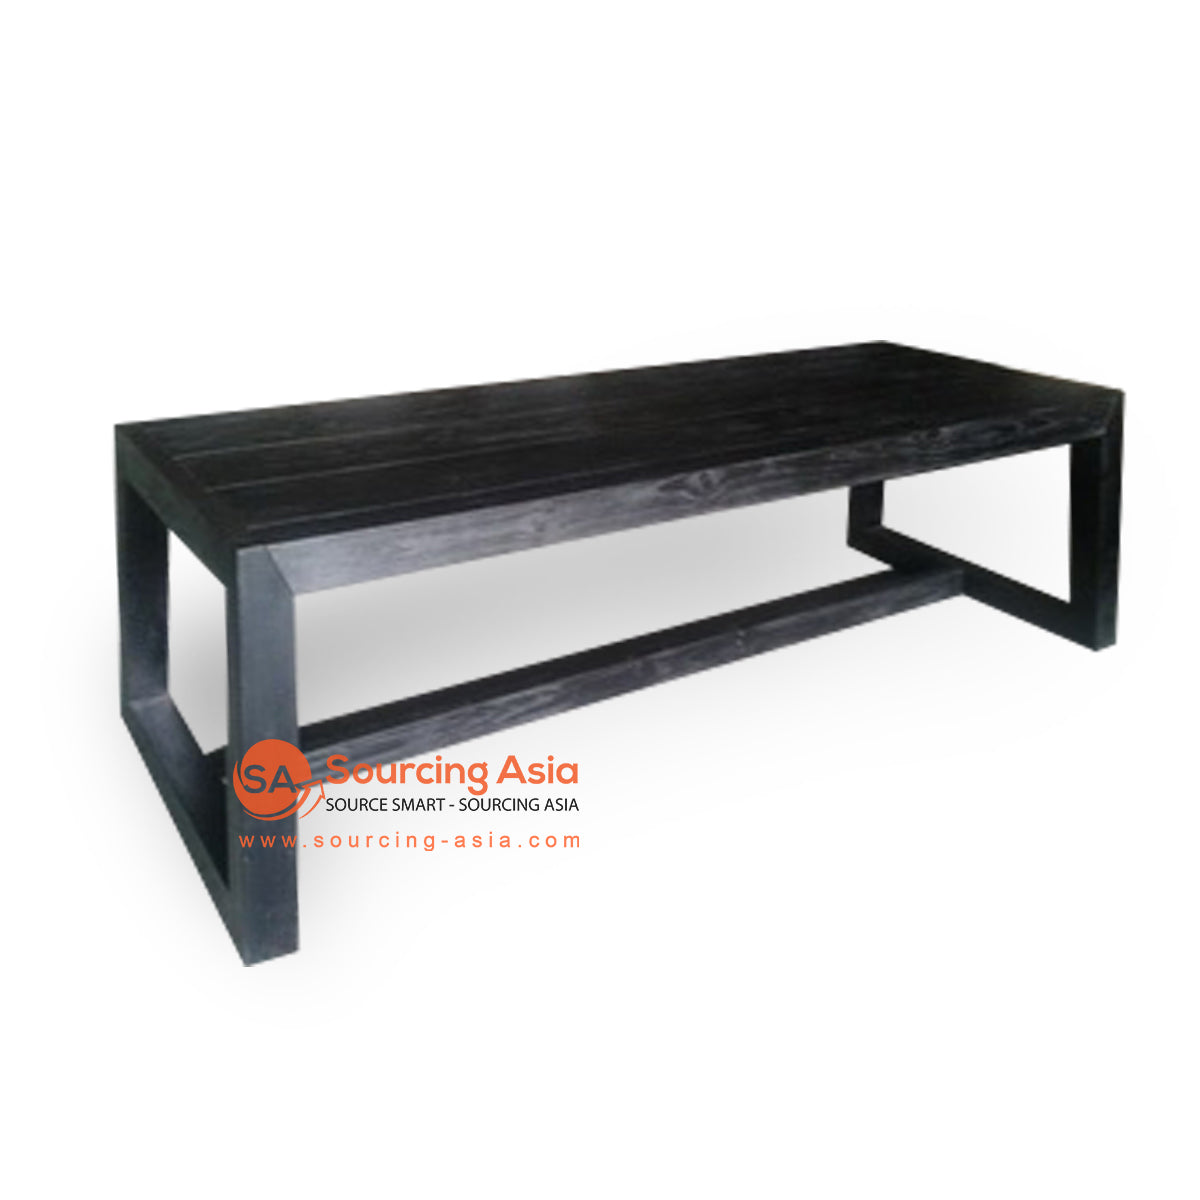 ECL060 BLACK RECYCLED TEAK WOOD SLATTED DINING TABLE